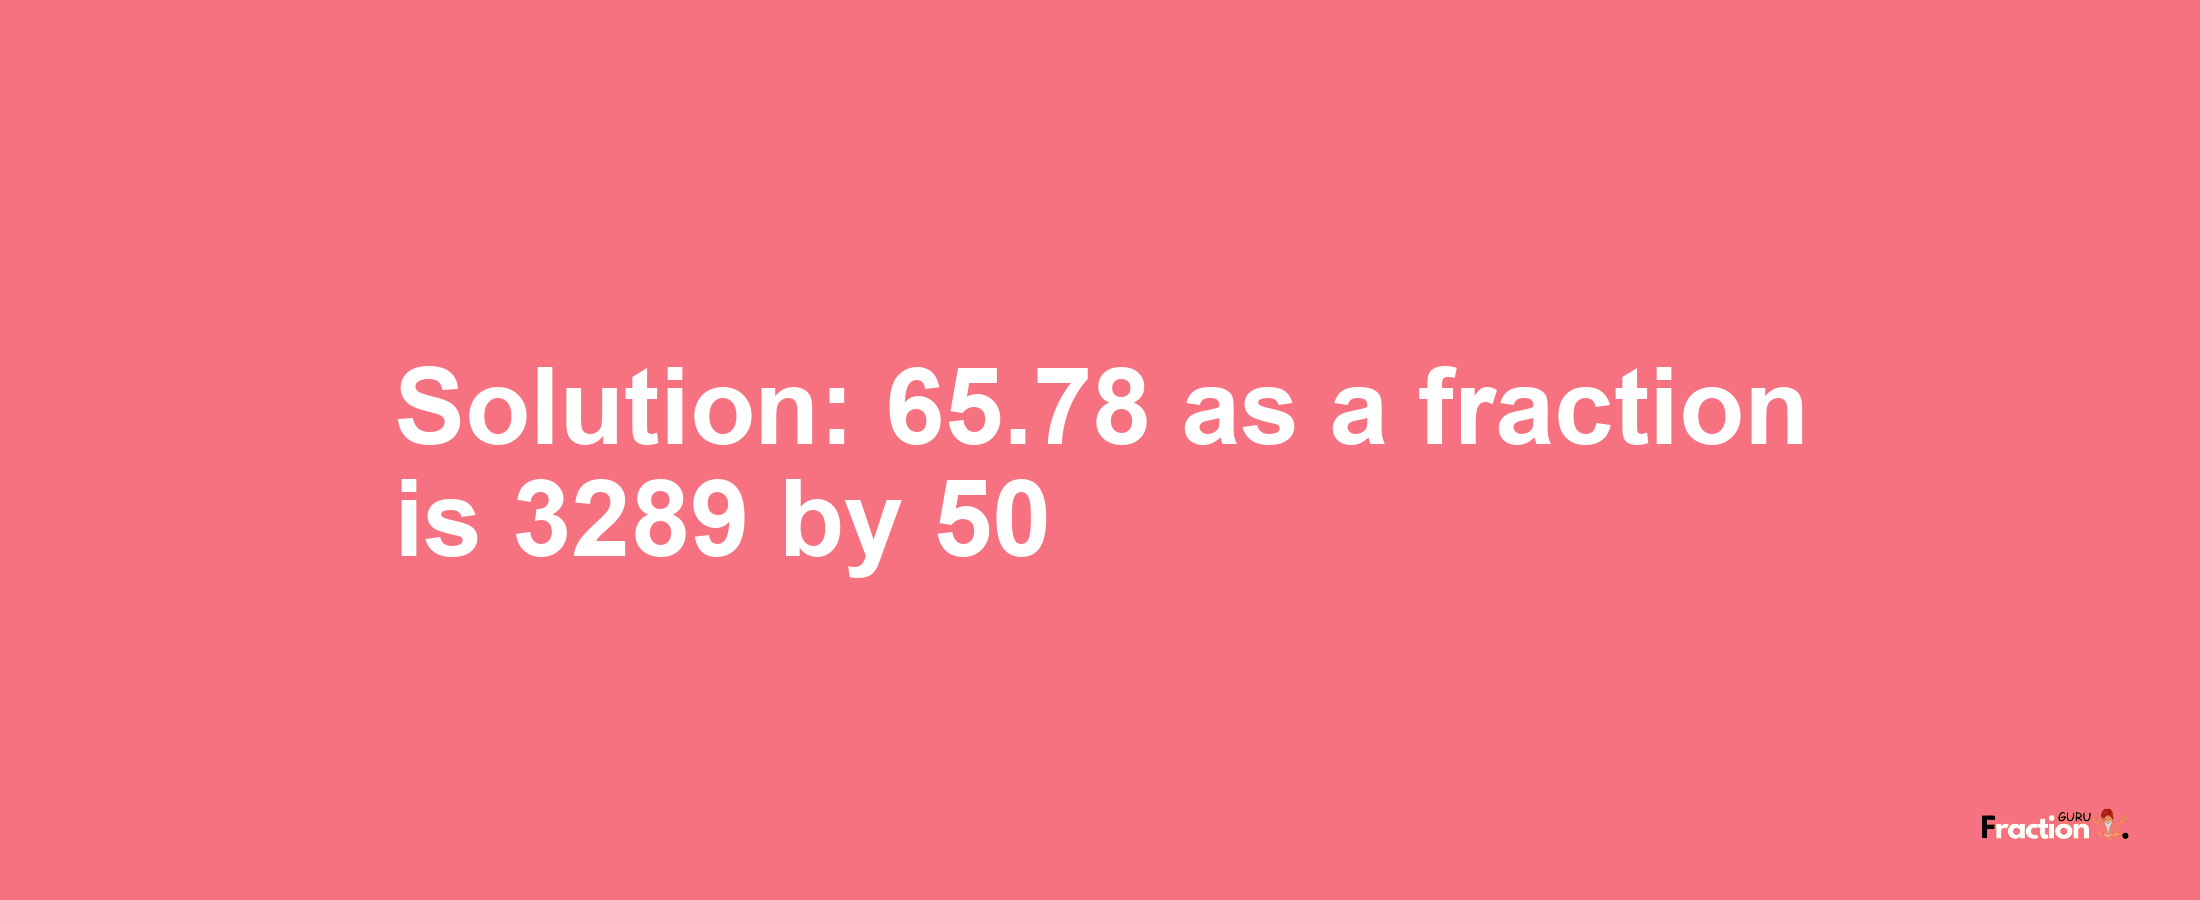 Solution:65.78 as a fraction is 3289/50